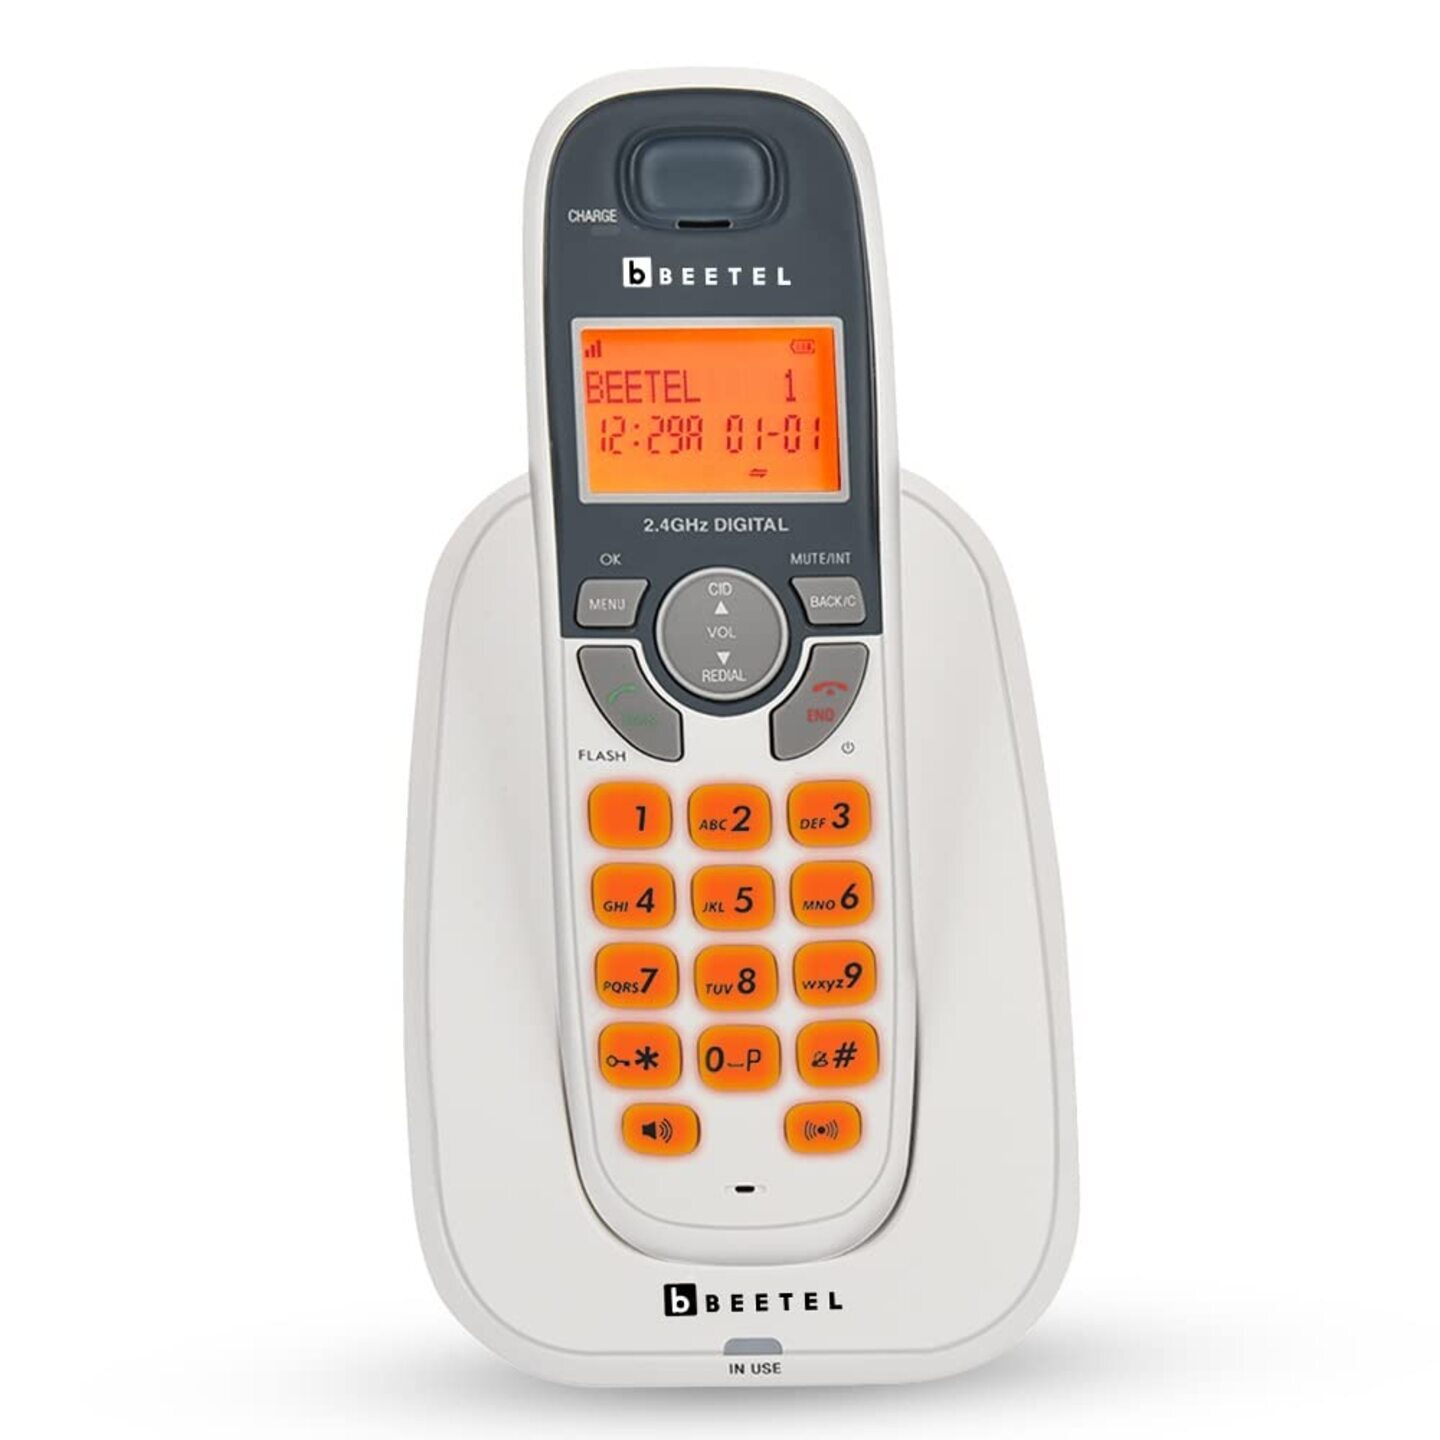 Beetel X70 Cordless Phone with 2 Way Speaker, Ringer Volume and LED Notification (White)